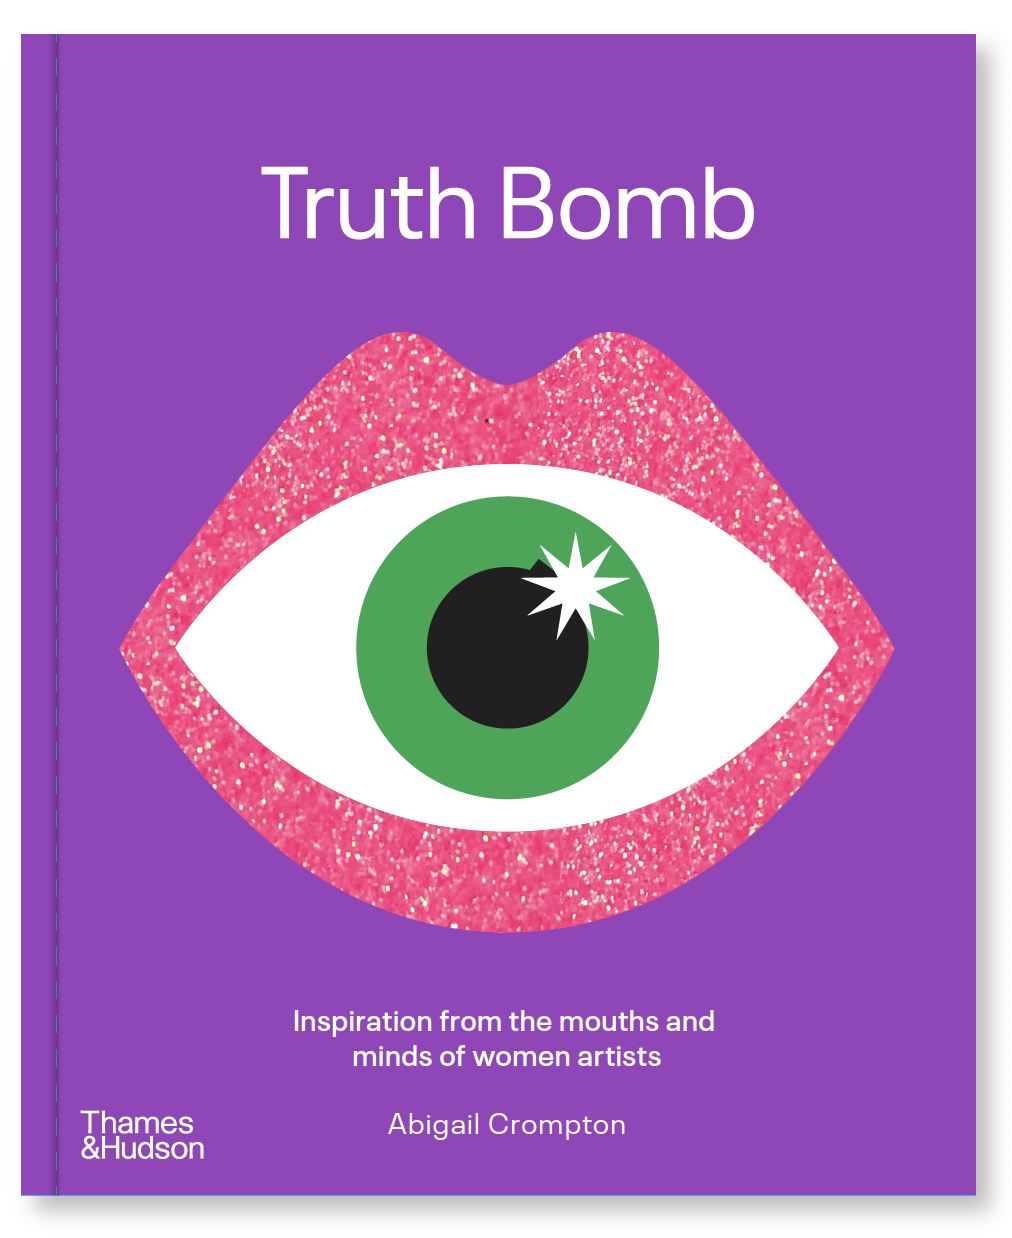 Truth Bomb Limited Edition book x Abigail Crompton - Third Drawer Down